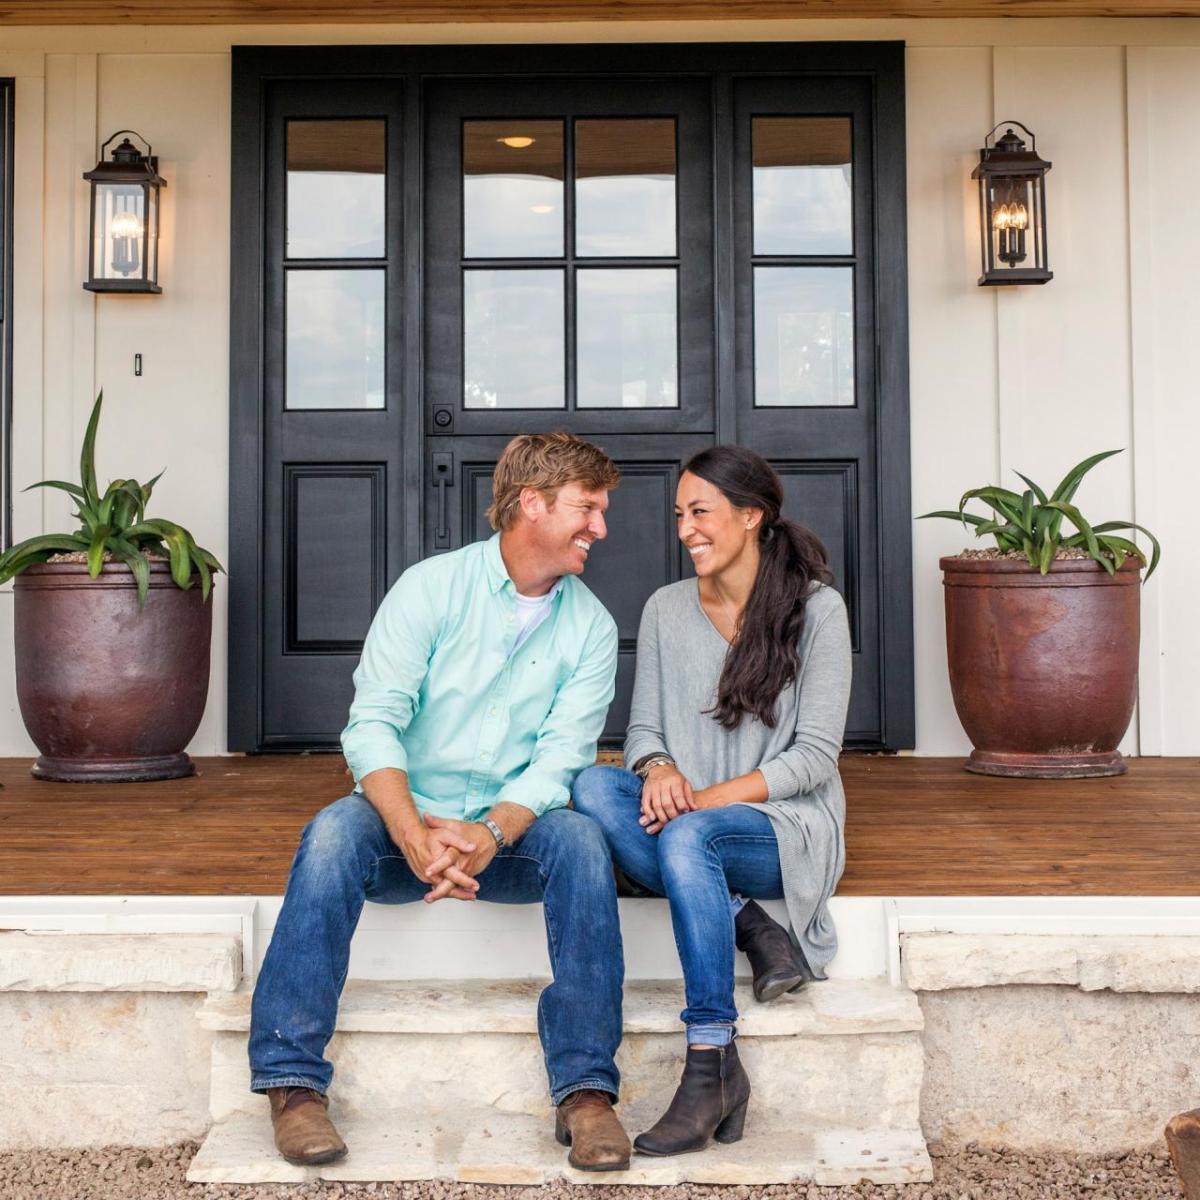 Are You Ready to See Your Fixer Upper?